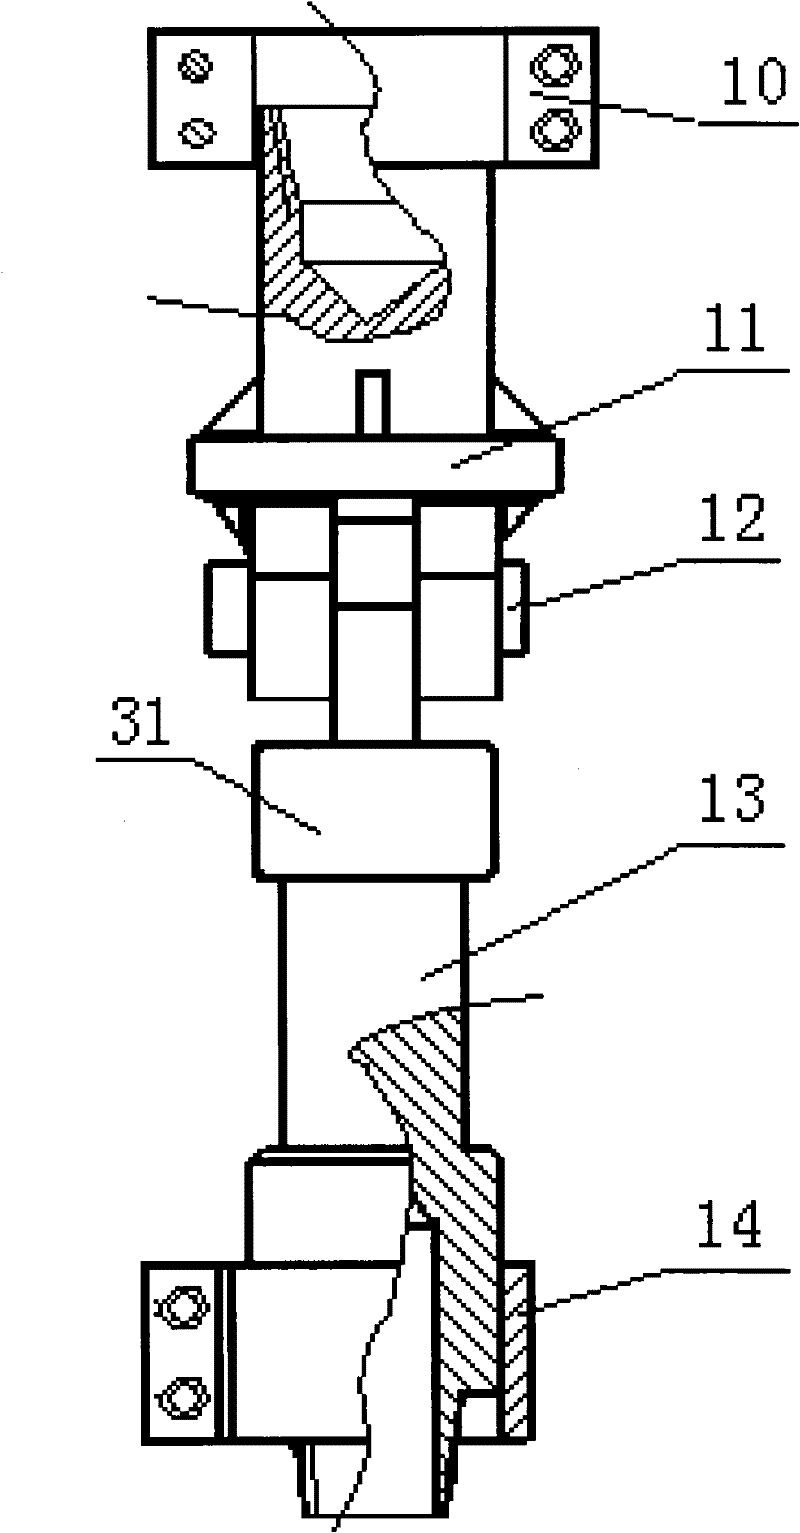 Tripping method for operation by adopting power swivel and tool